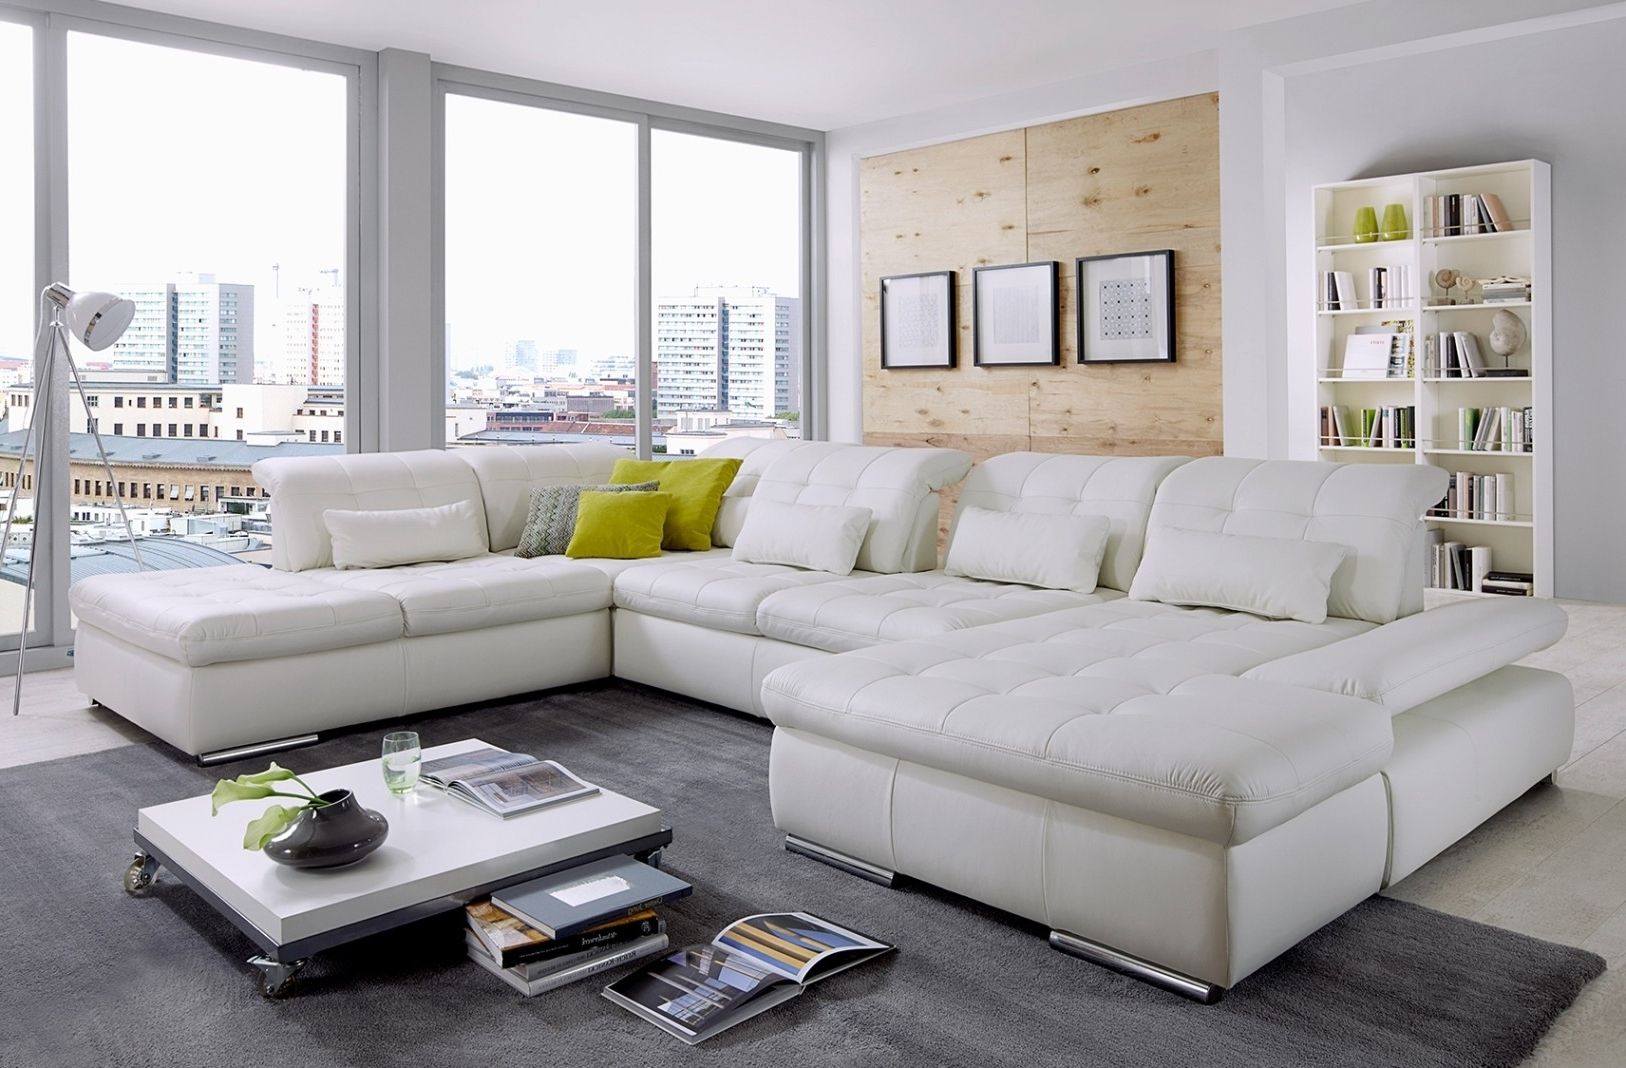 Popular Alpine Sectional Sofa In Punch White Leather Throughout Trinidad And Tobago Sectional Sofas (View 1 of 20)